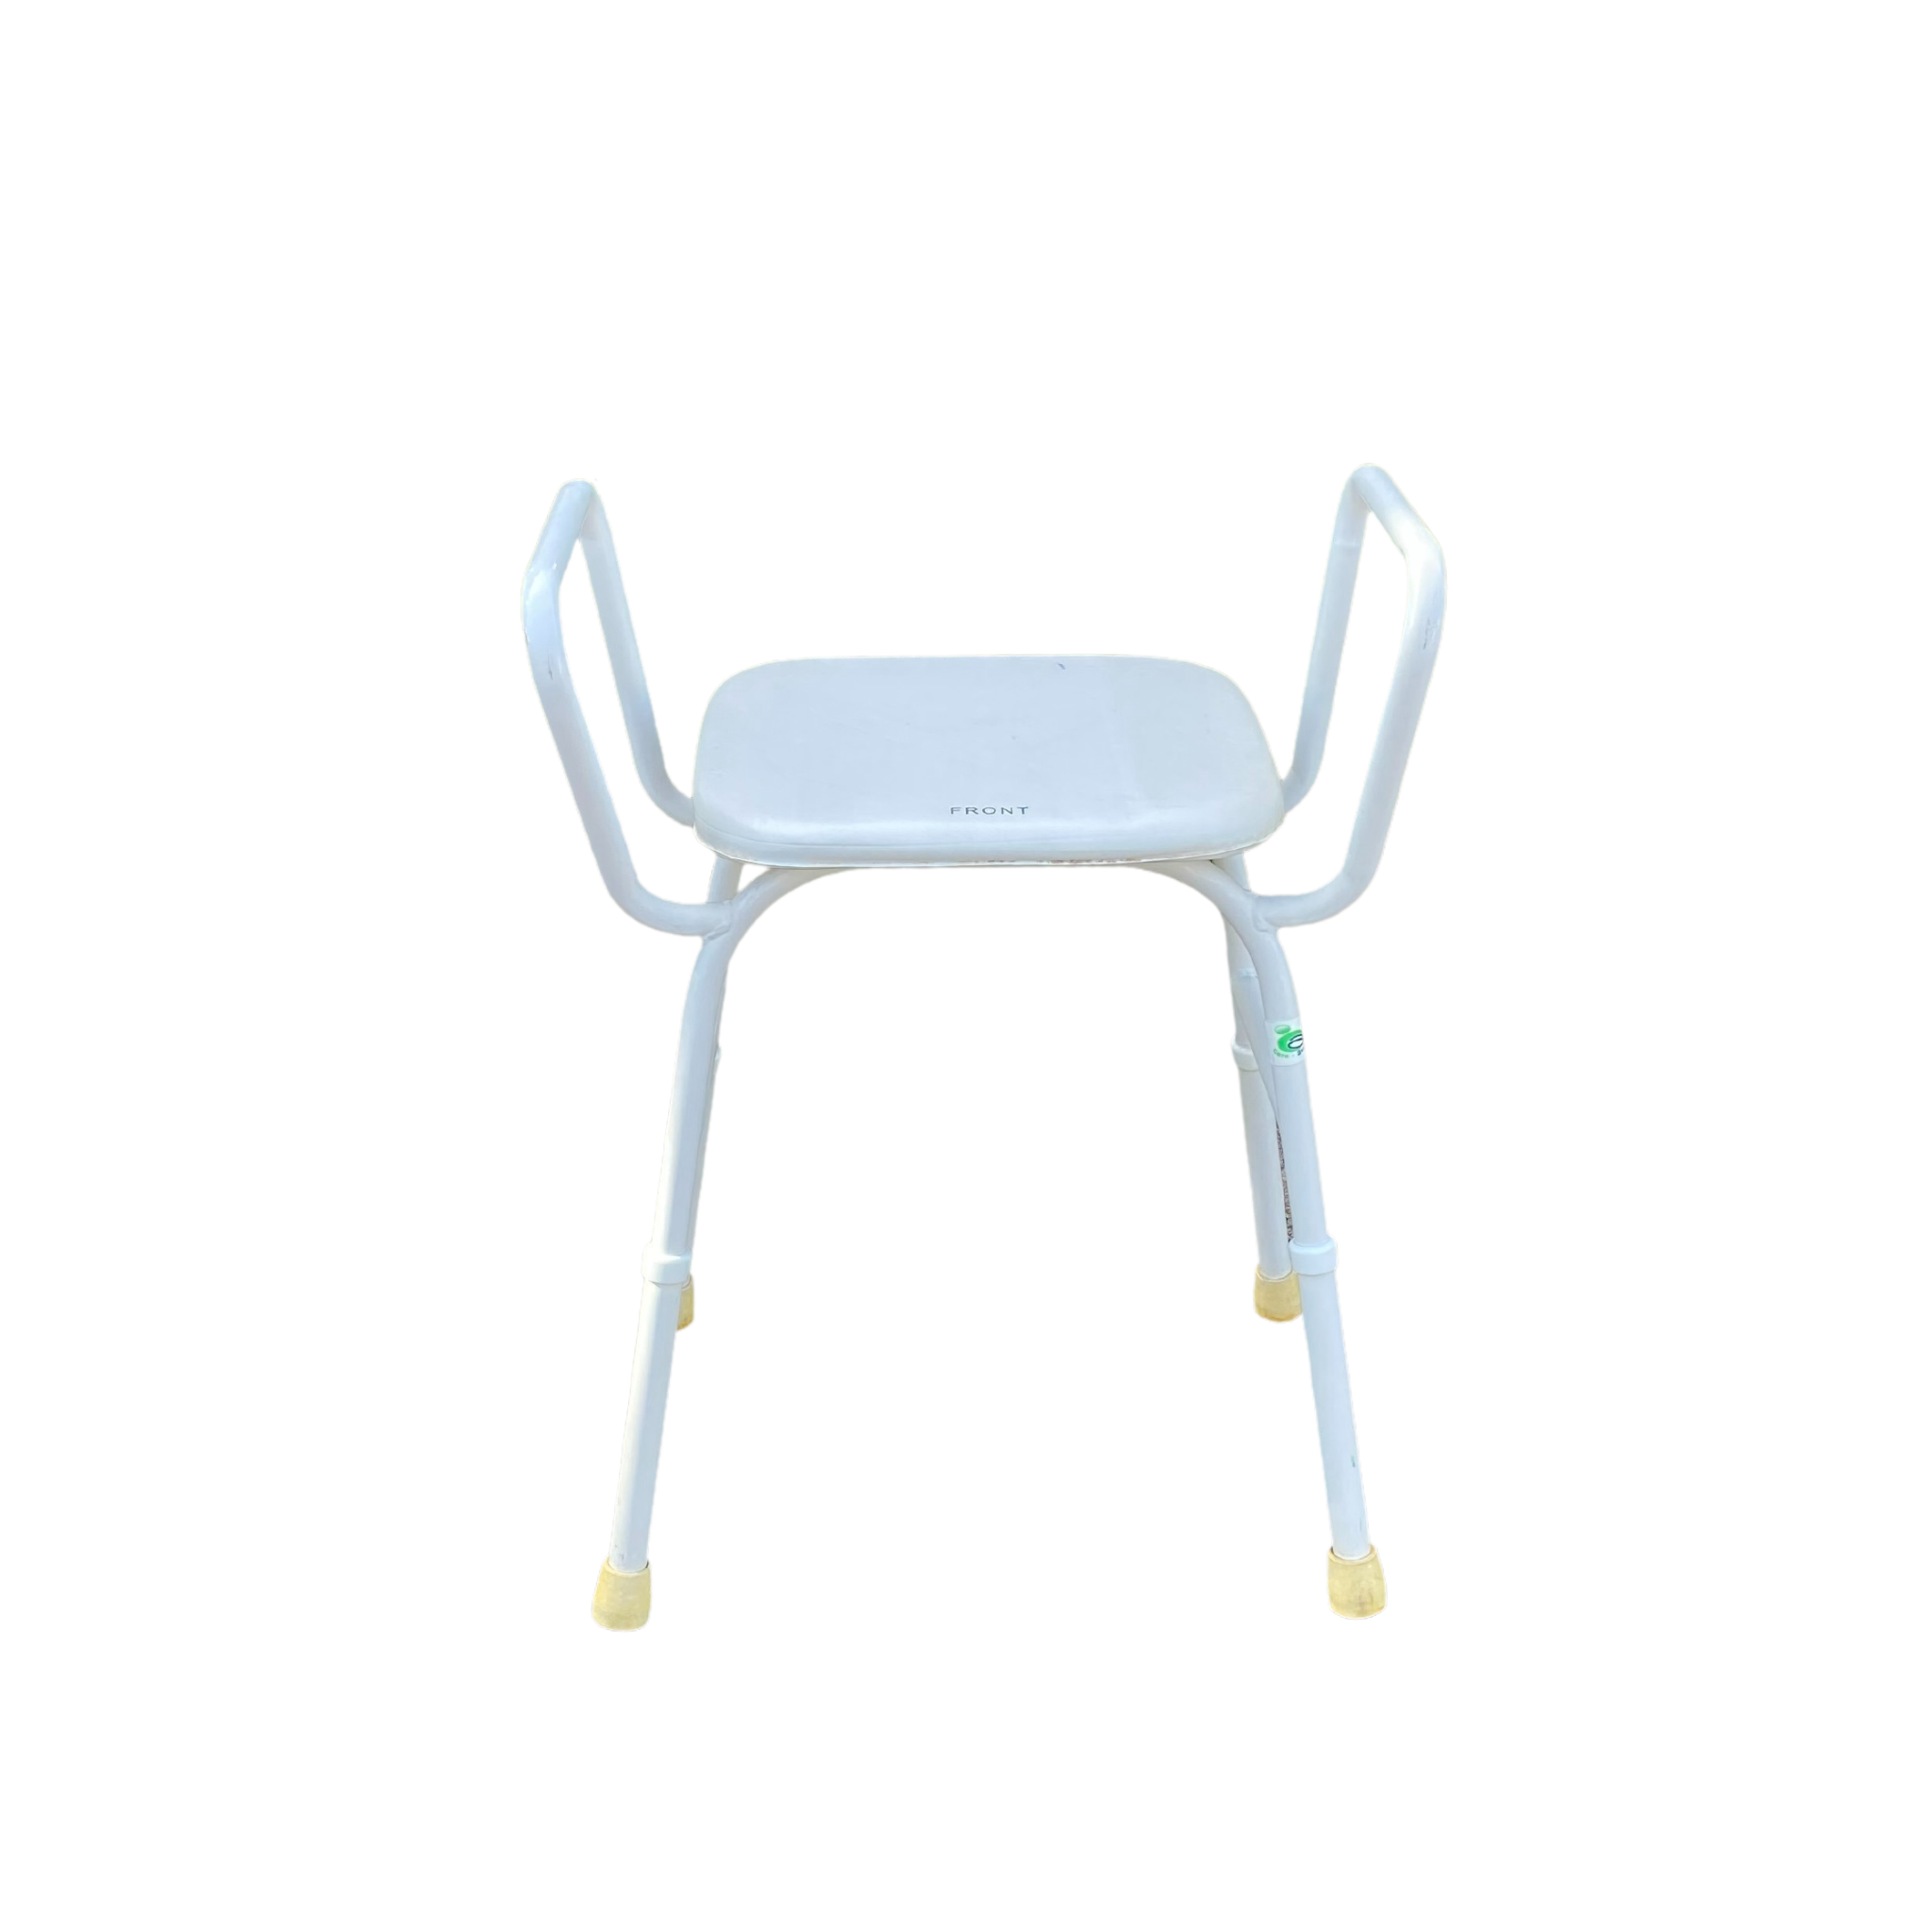 Rental - Padded Shower Stool from Aged Care and Medical - Shower Stool for Hire for Aged Care